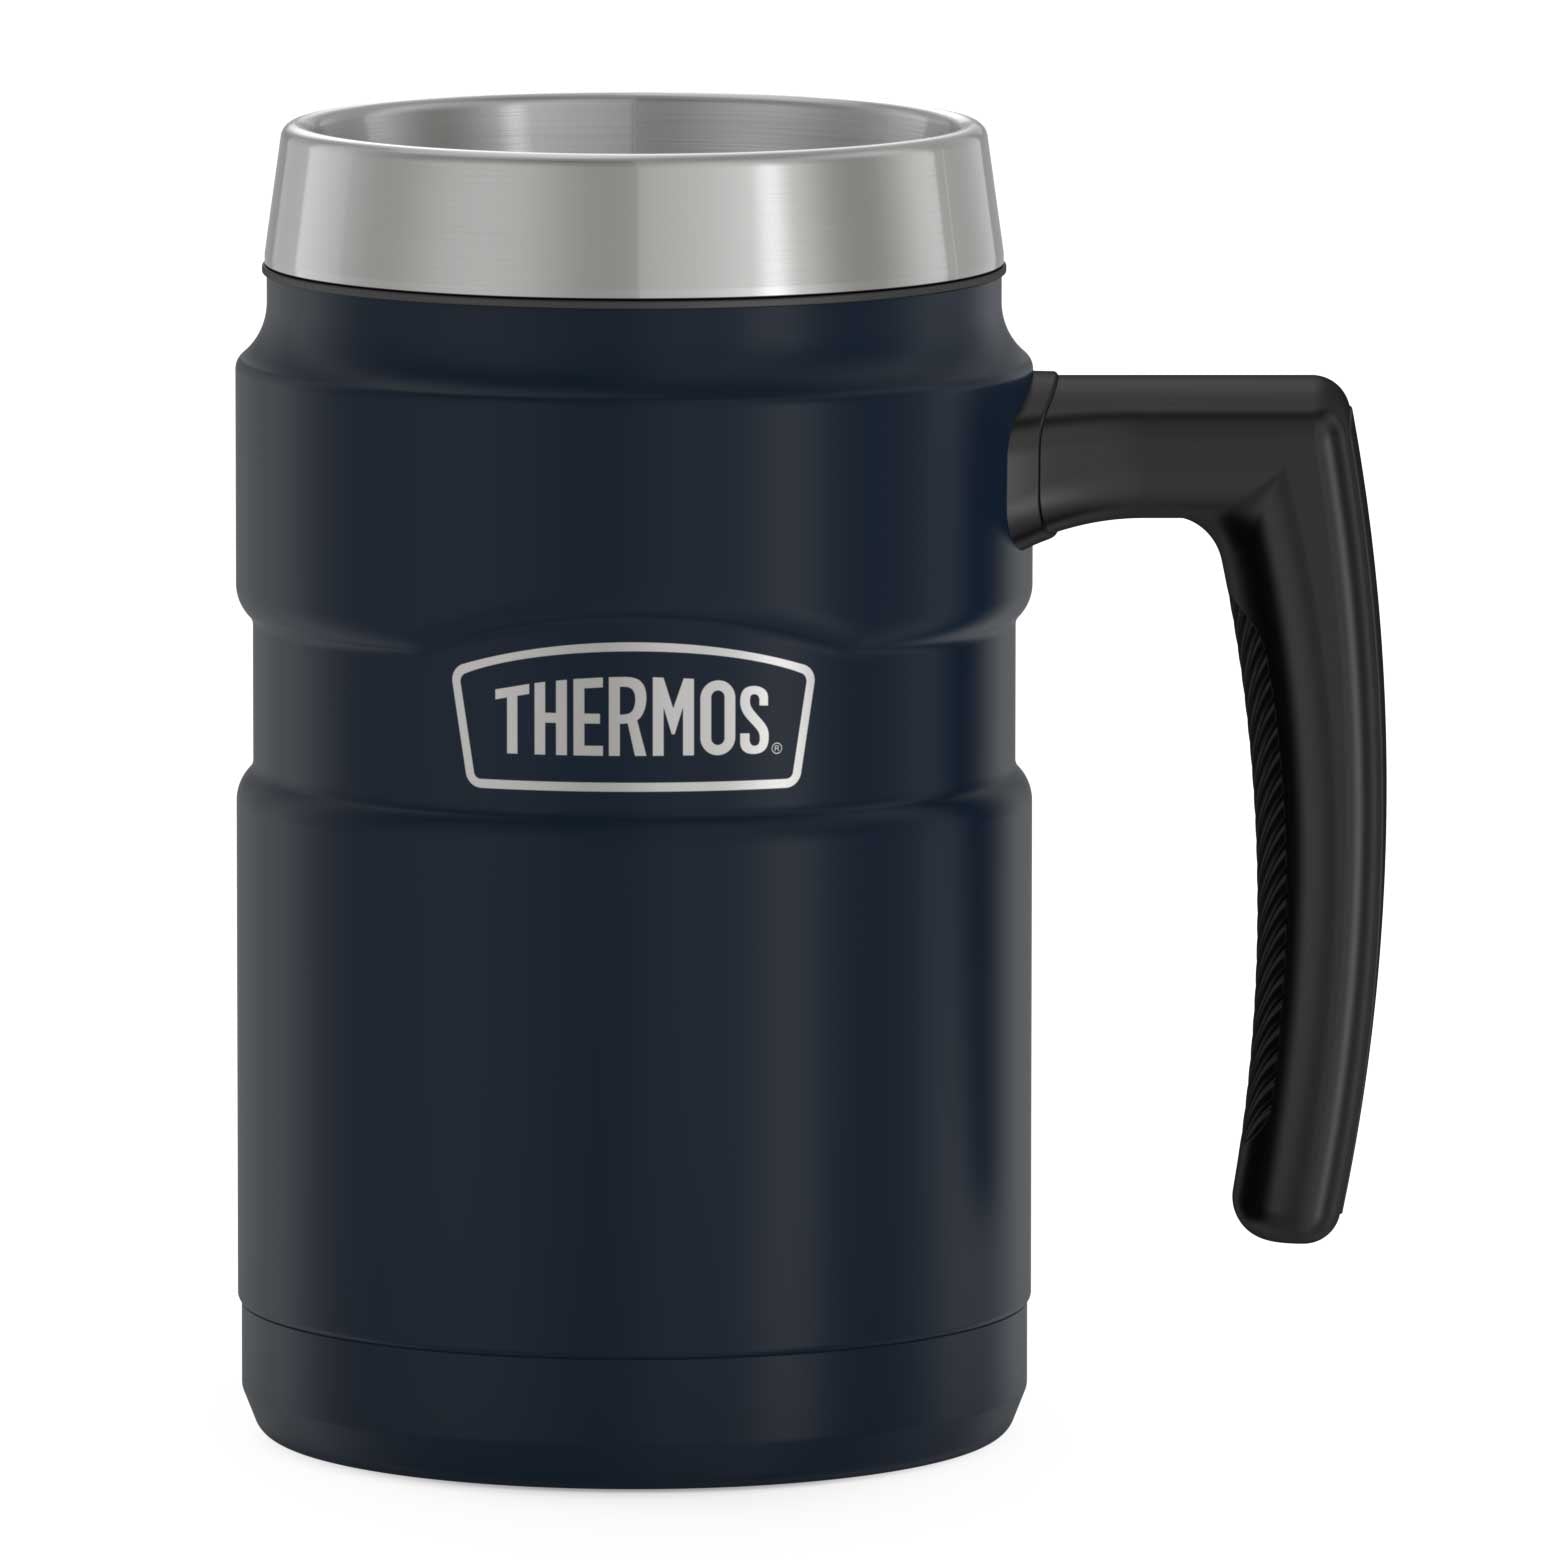 Thermos - Stainless Steel Coffee Cup Insulator